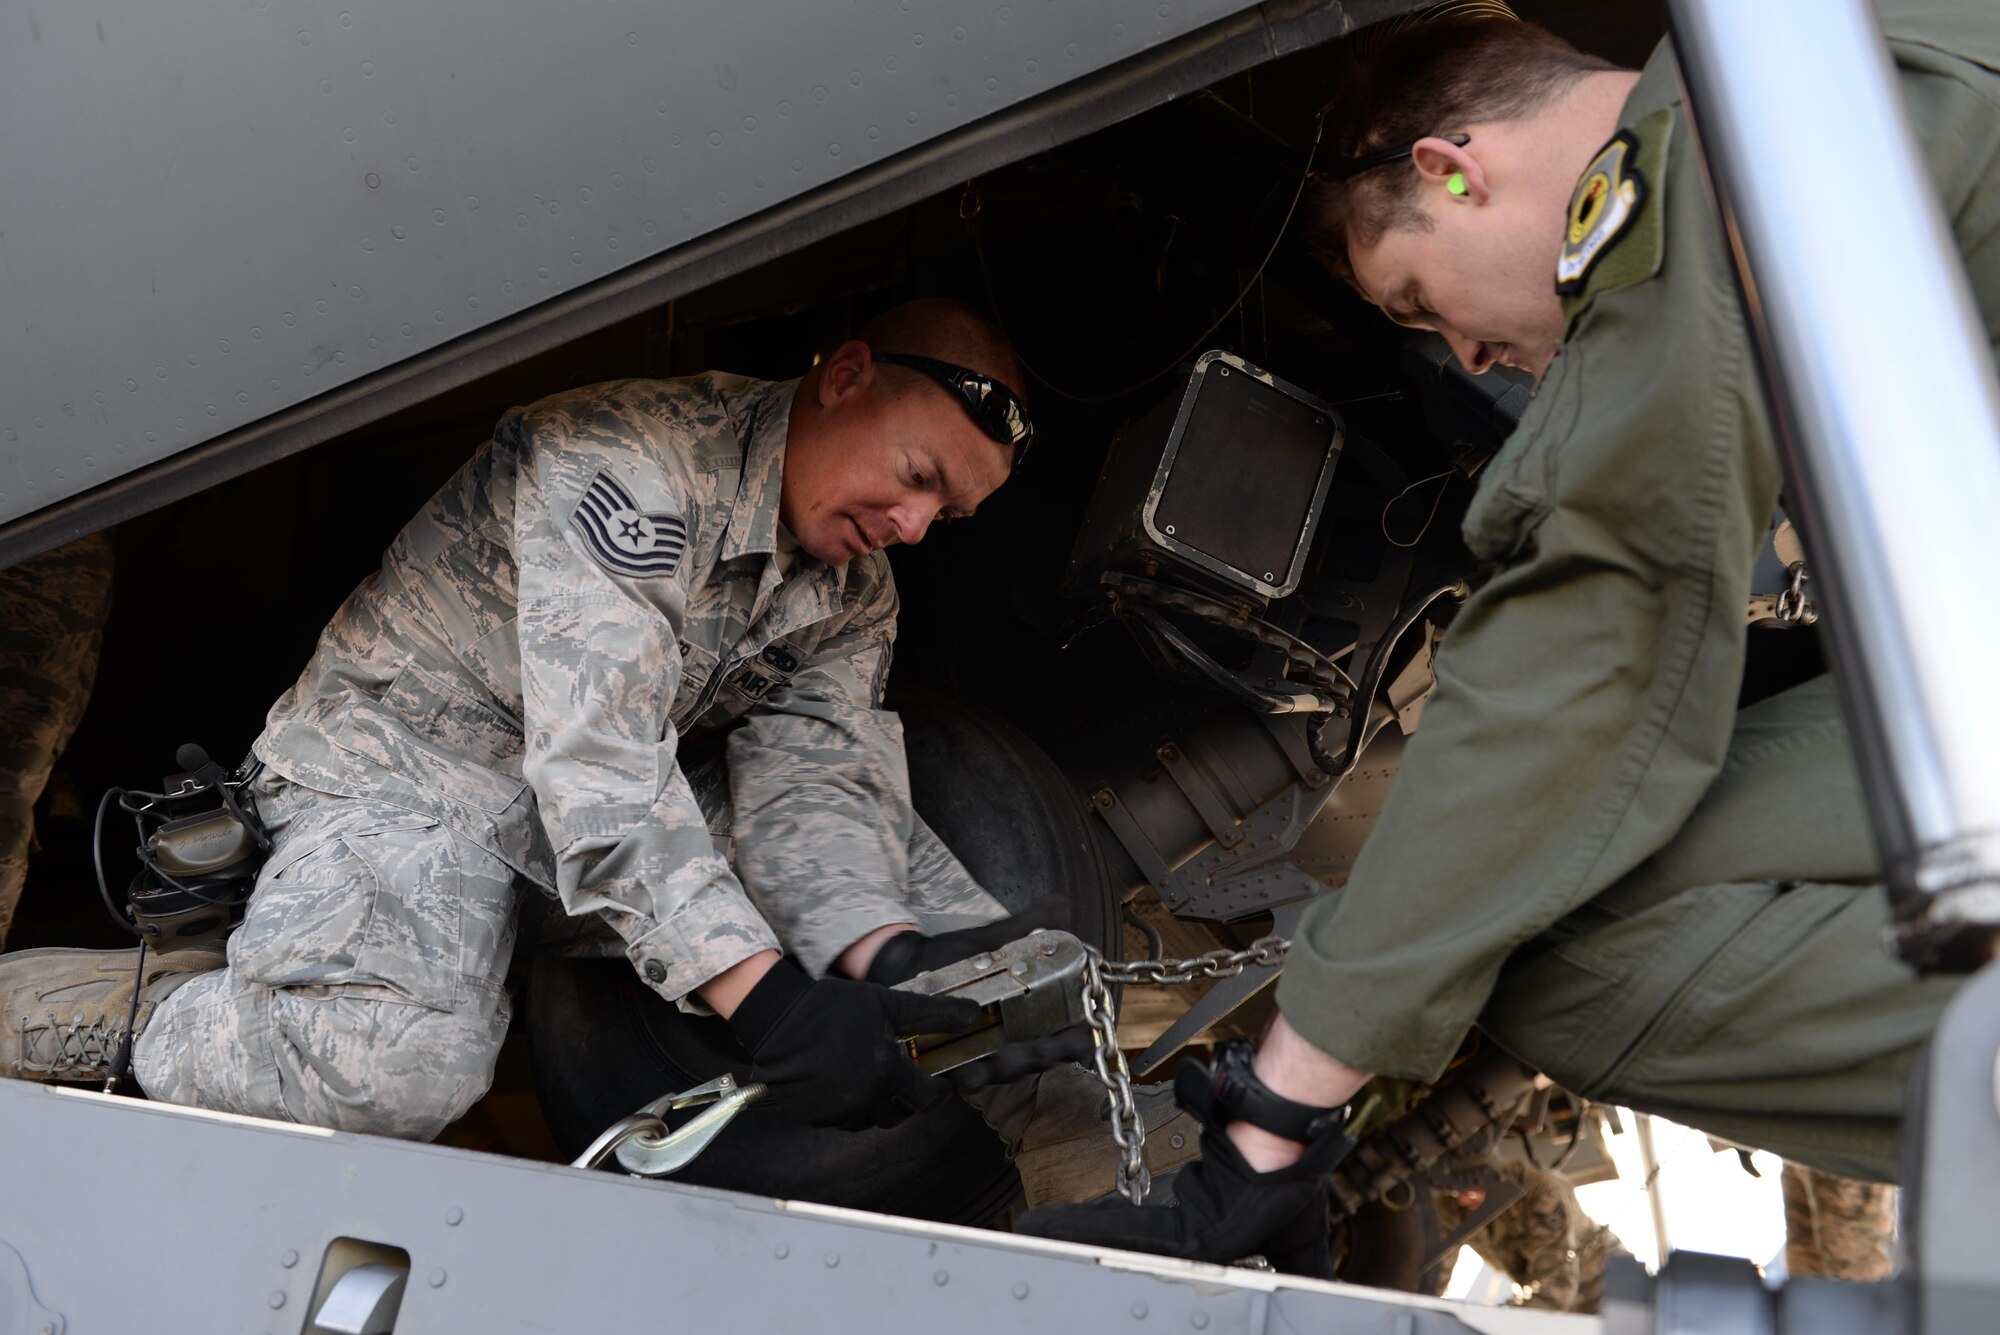 Airmen, 34th Weapons Squadron, tighten a cargo chain on a C-17 Globemaster III assigned to the 57th Weapons Squadron, McChord Air Force Base, Wash., at Nellis Air Force Base, Nev., March 28, 2017. The C-17 transported two HH-60 Pave Hawk helicopters for a training exercise. (U.S. Air Force photo by Airman 1st Class Andrew D. Sarver/ Released)